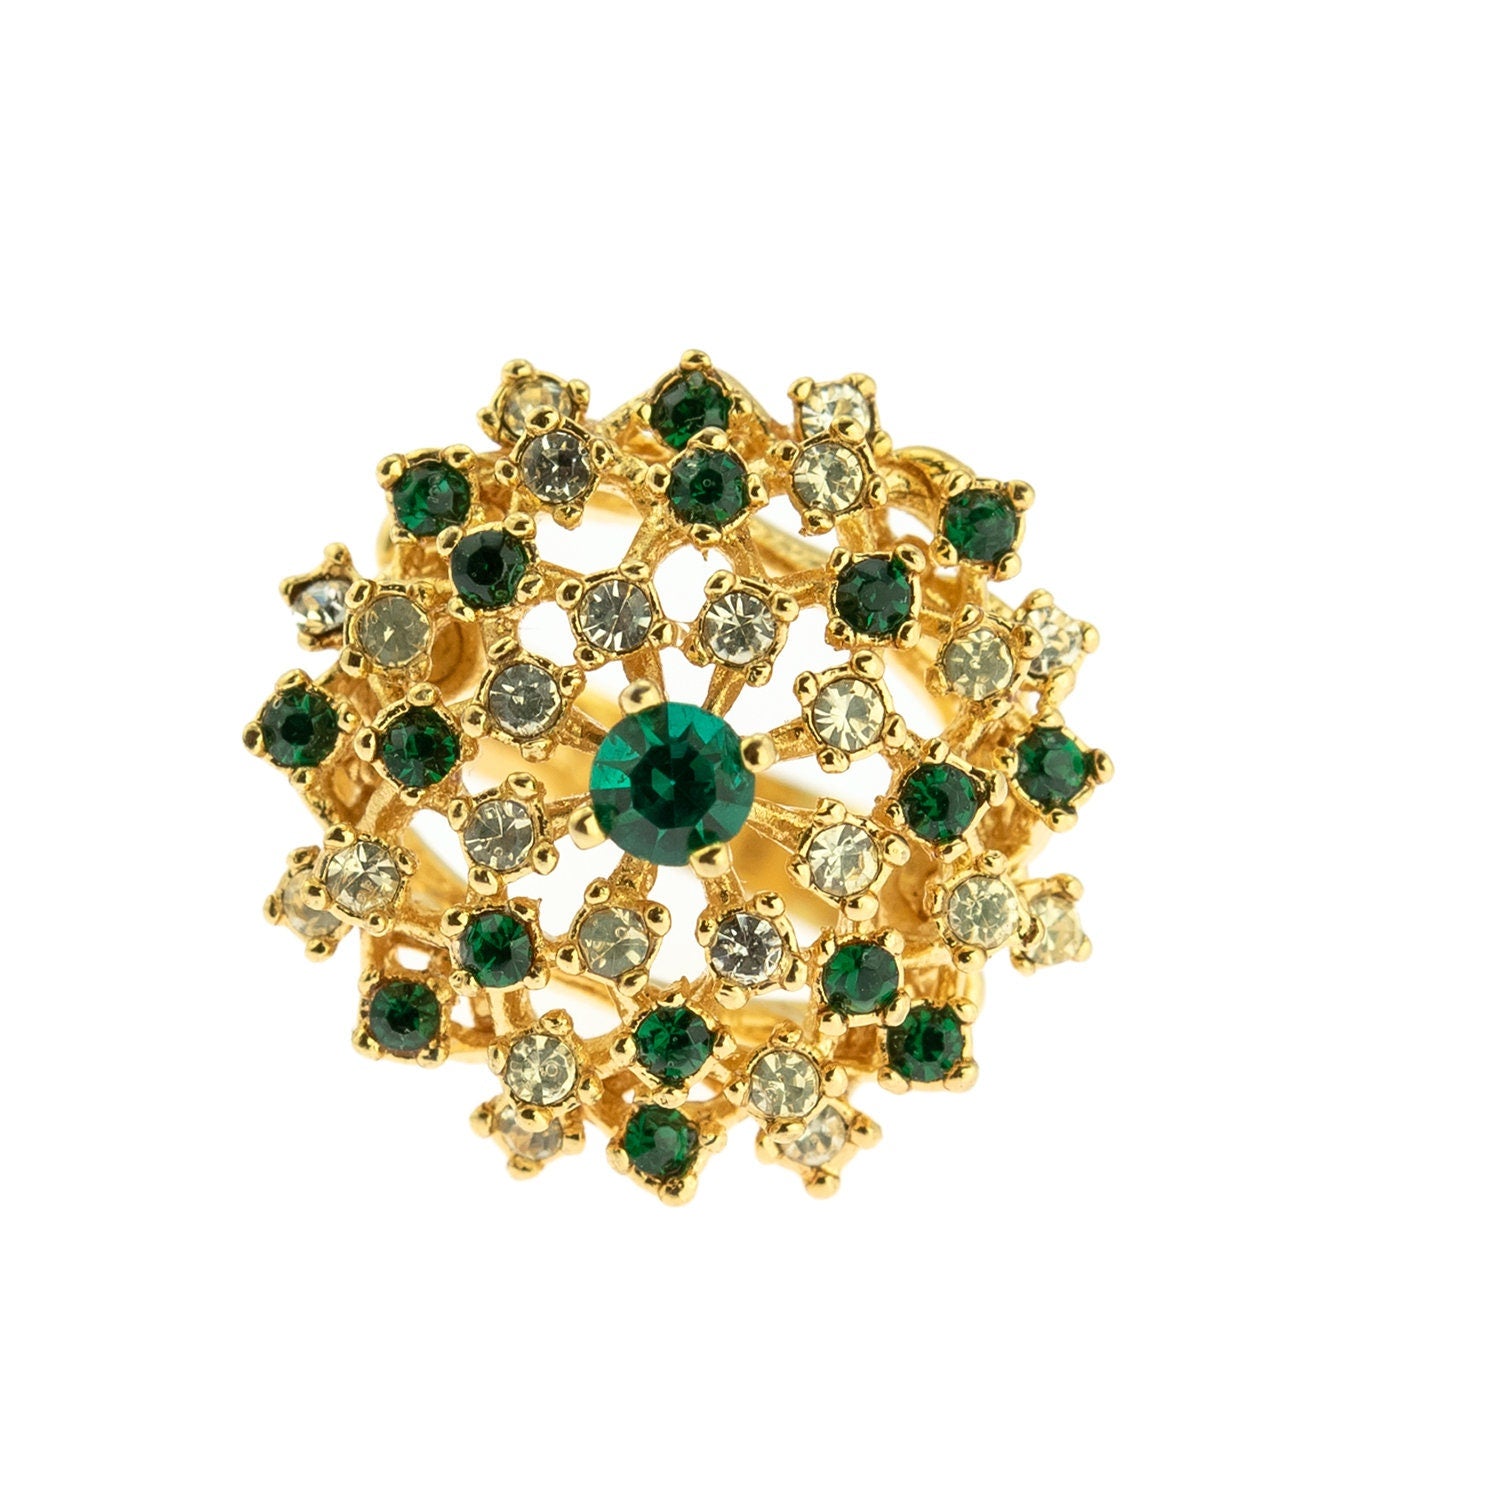 Vintage Ring Emerald and Clear Swarovski Crystal Burst Ring 18k Gold R195 Antique Womans Jewelry - Limited Stock - Never Worn